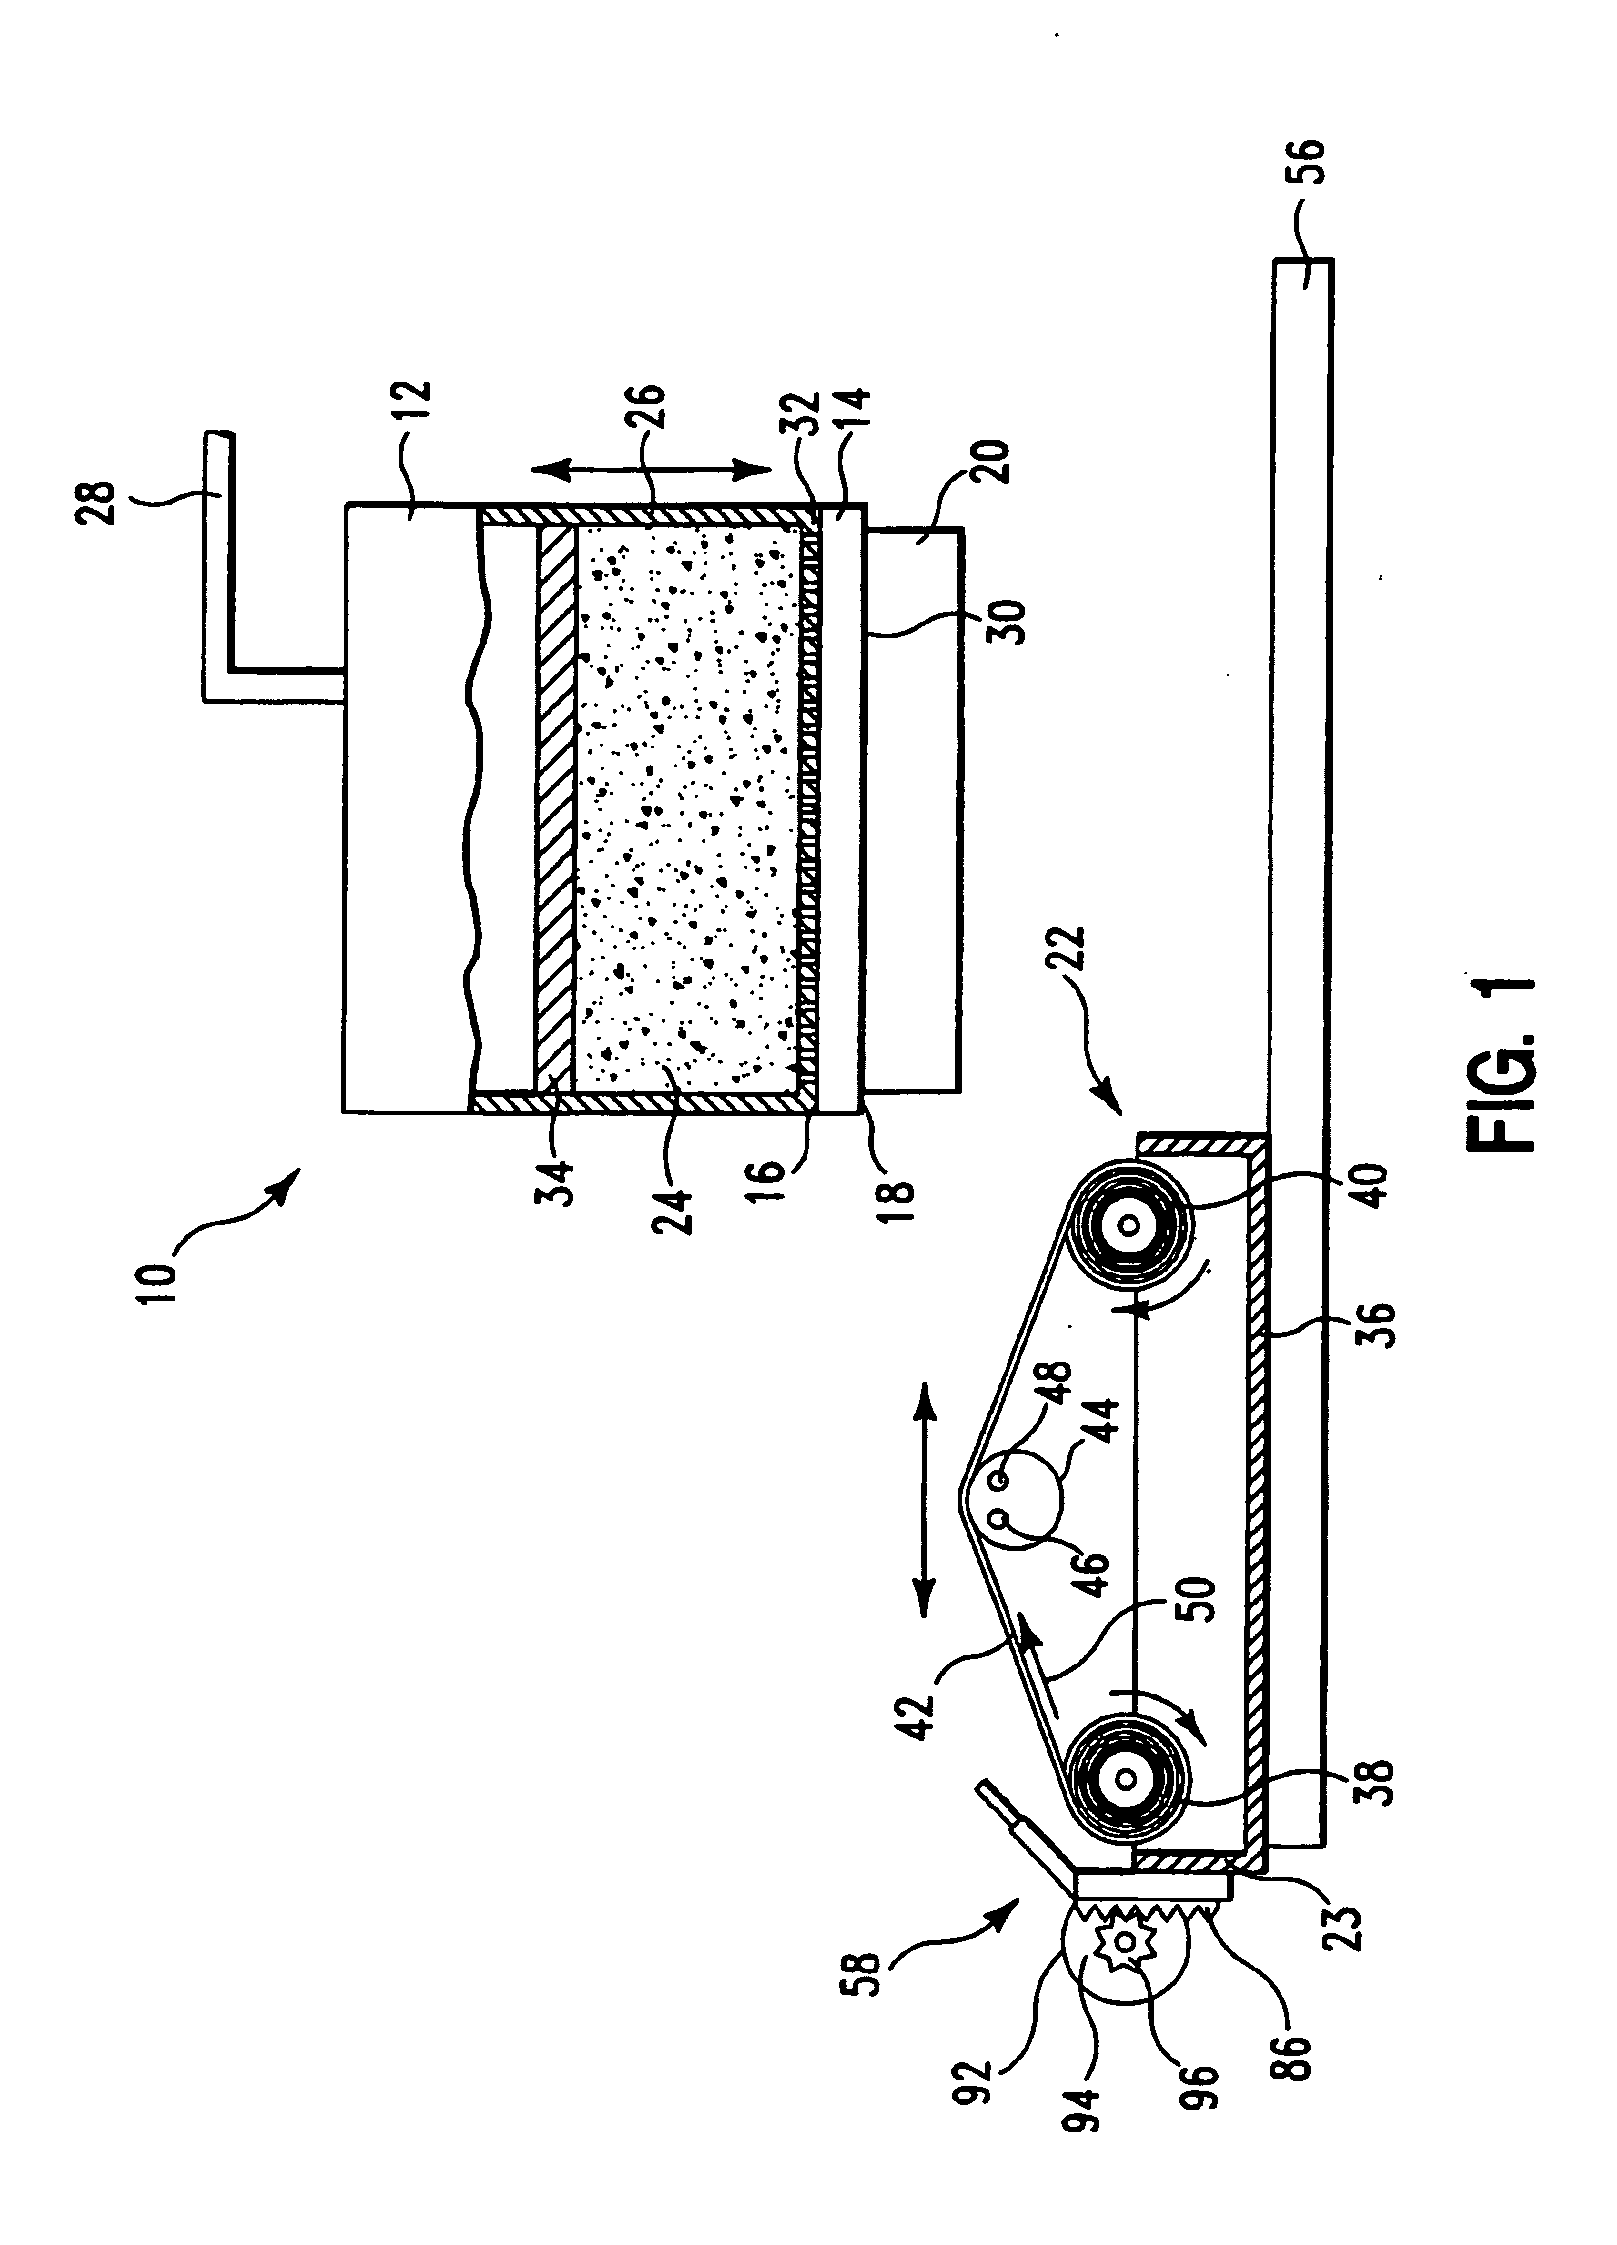 Apparatus and method for cleaning stencils employed in a screen printing apparatus